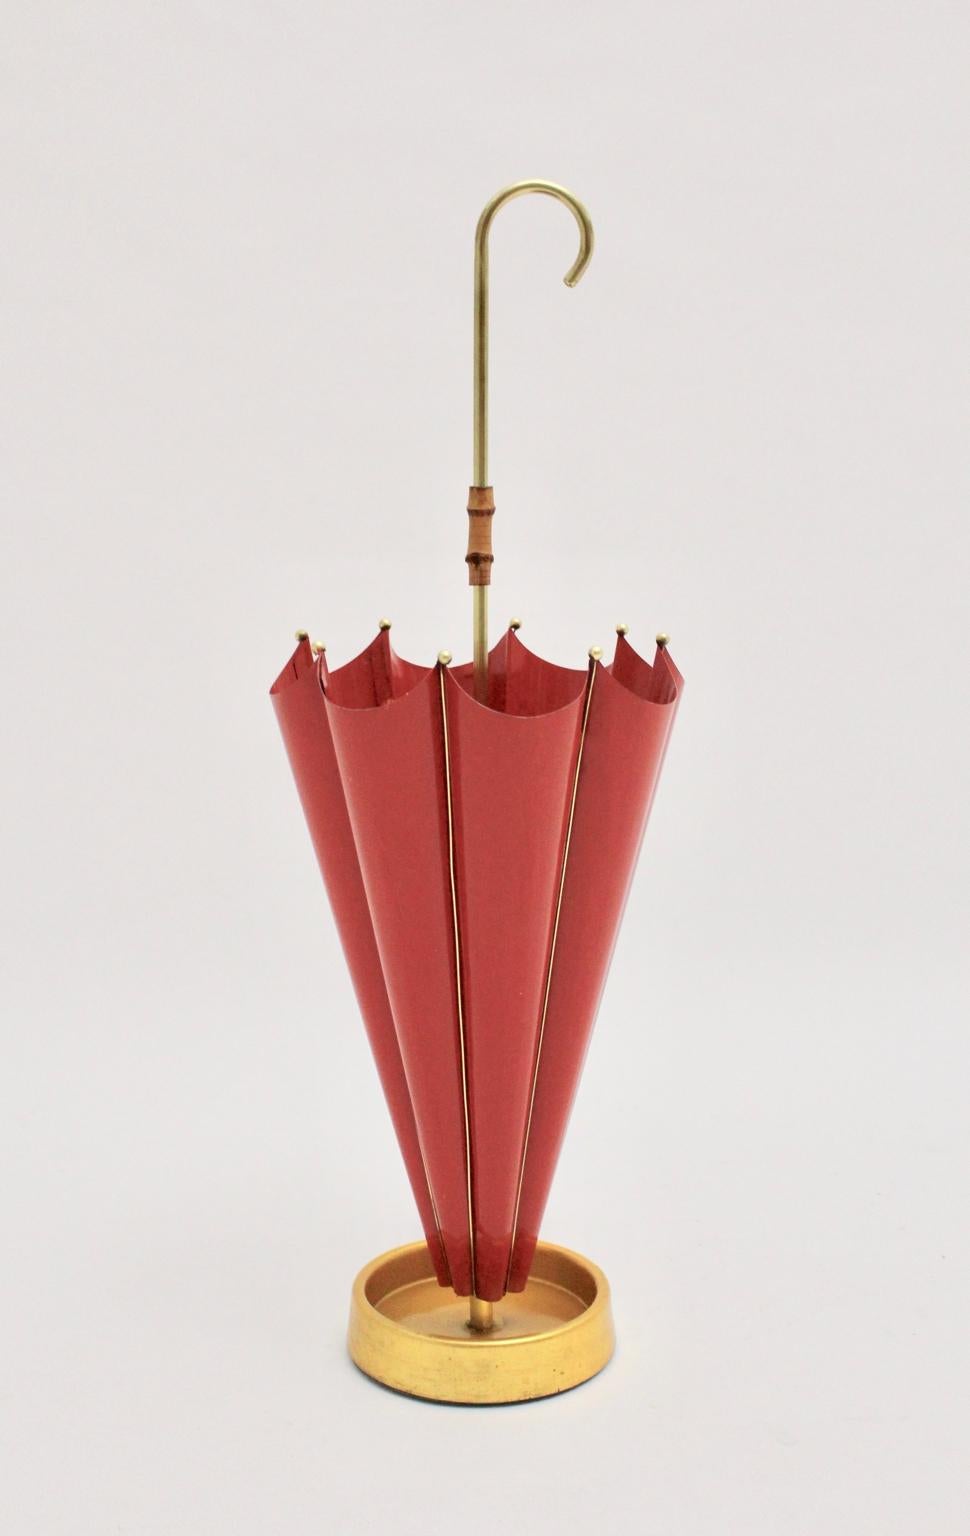 We present a very charming red umbrella stand, which shows an amazing umbrella form and was made out of red lacquered sheetmetal.
Furthermore the umbrella stand features brass details, bamboo detail, brass handle and an iron base for a firm and